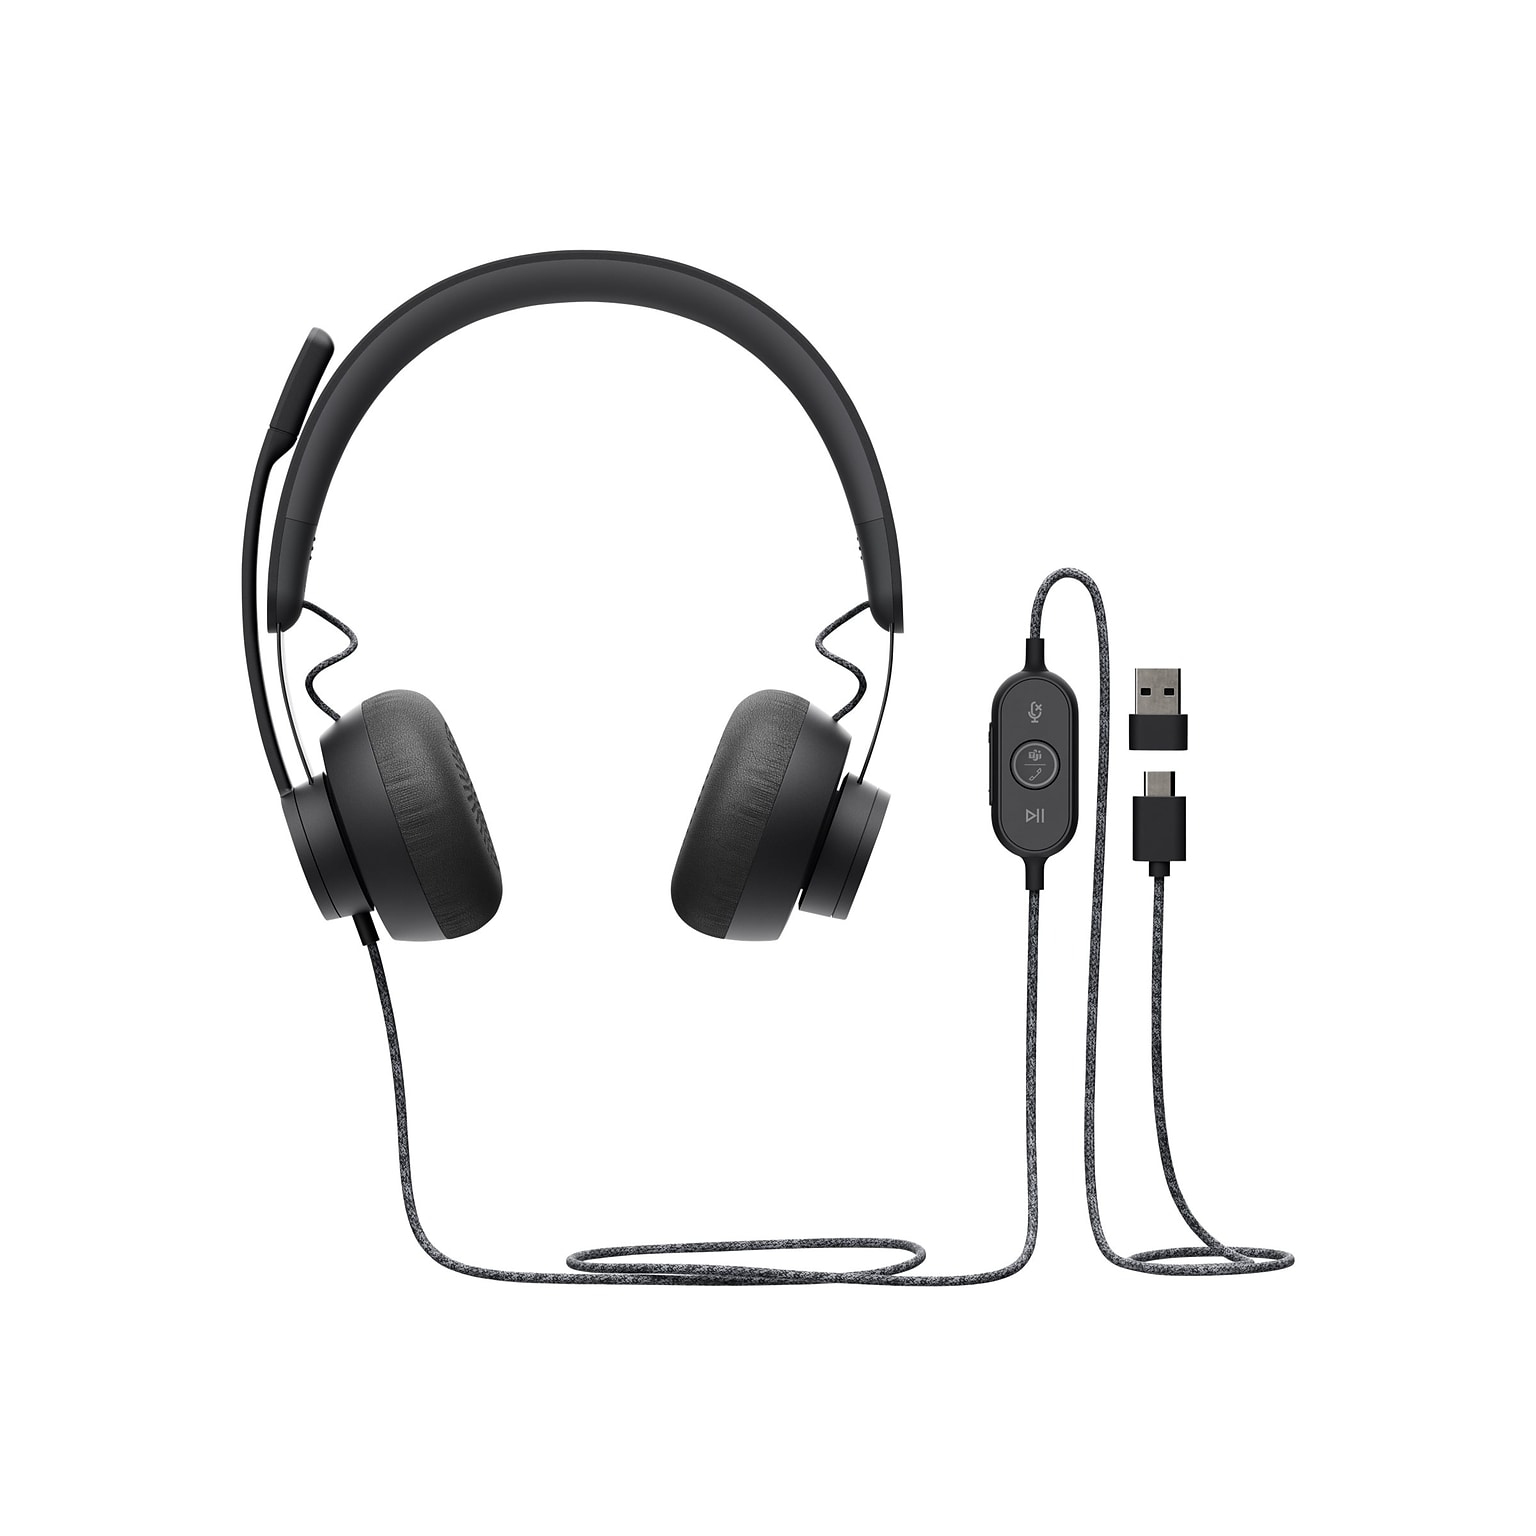 Logitech Zone Wired Noise Cancelling Stereo Computer Headset, Over-the-Head, Graphite (981-000871)